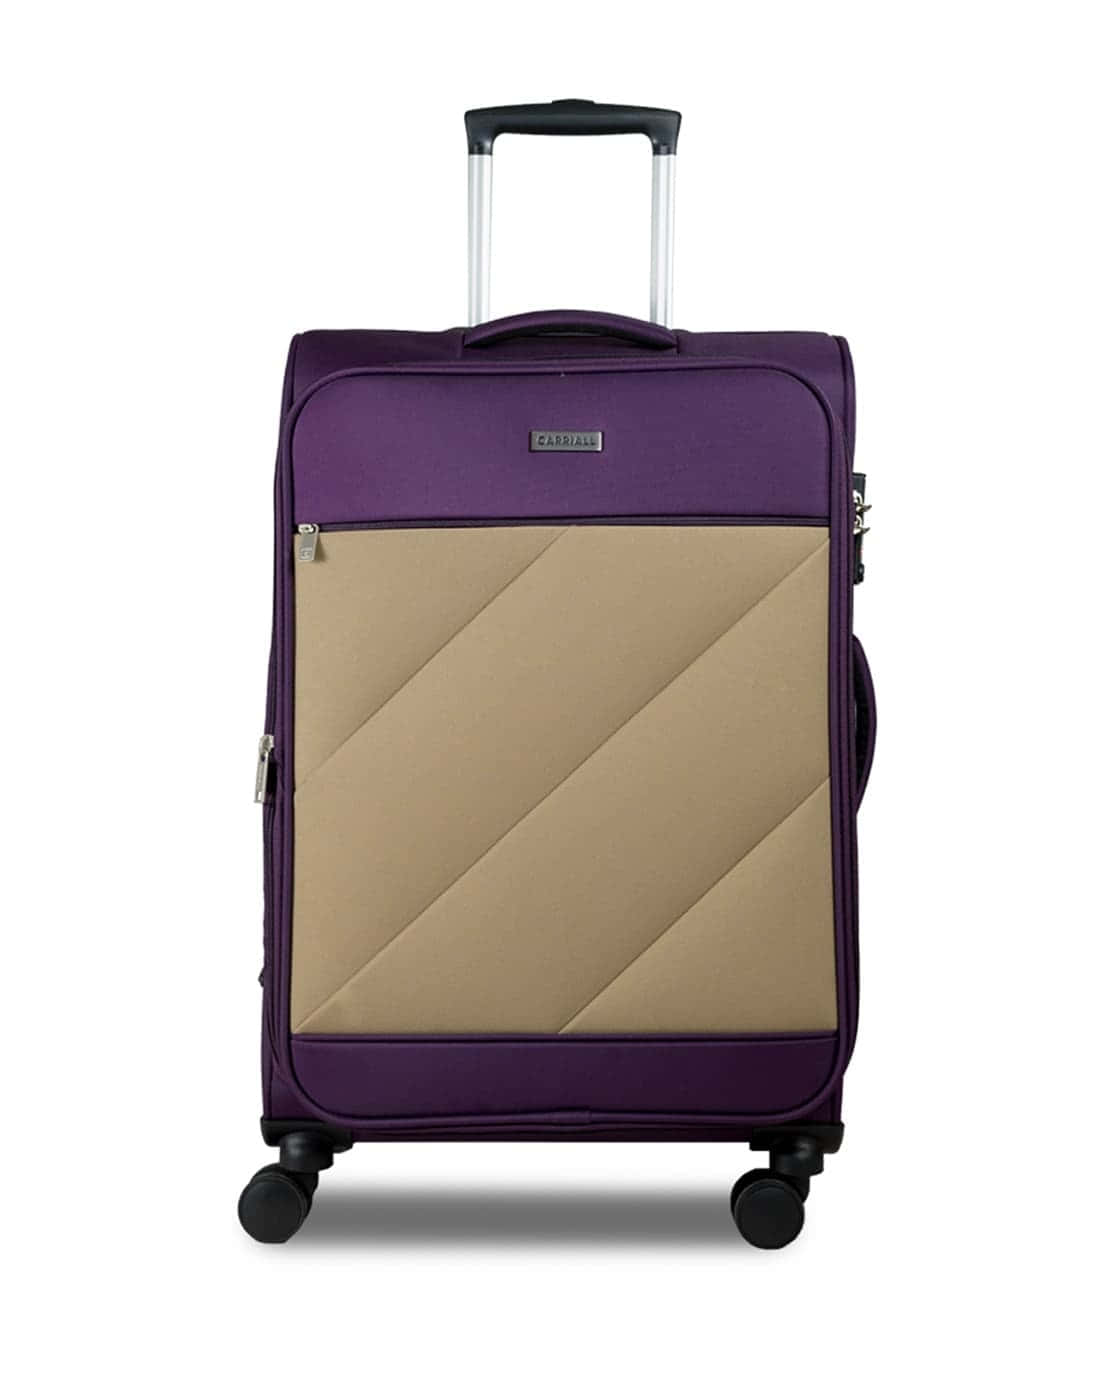 Time for a Trip in Style with our Sleek Purple Luggage Wallpaper